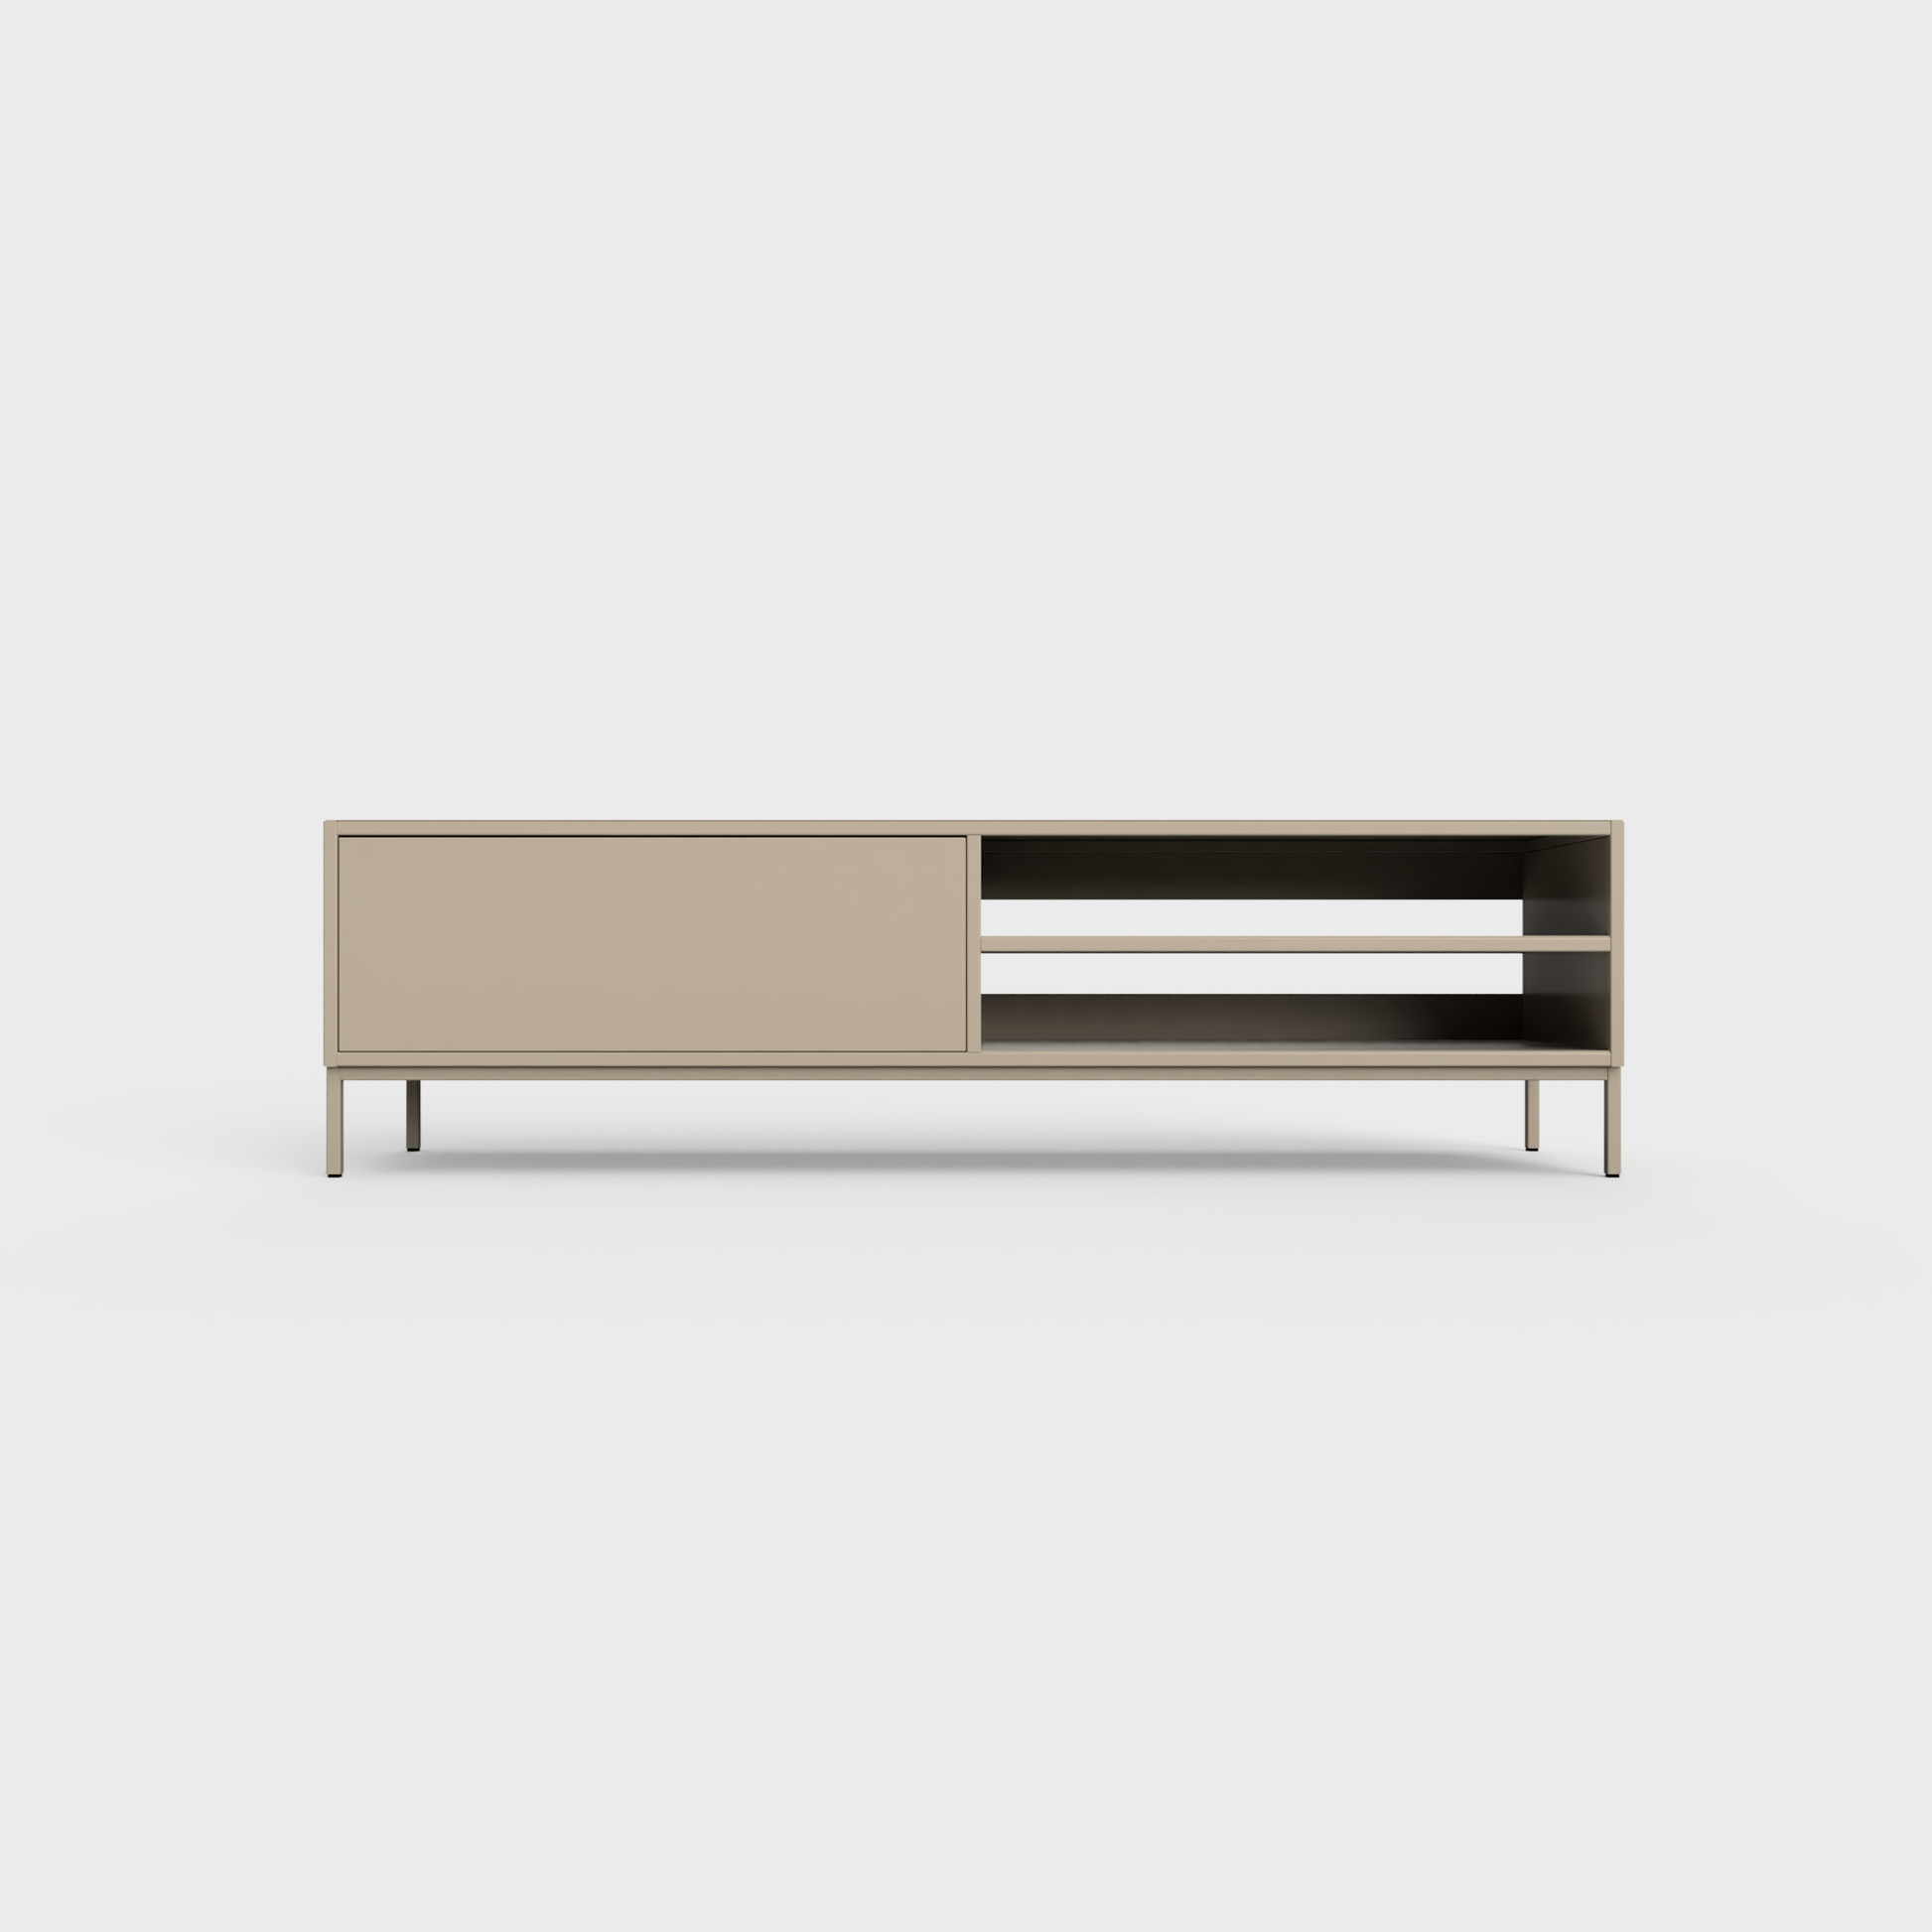 Prunus 02 Lowboard in Khaki color, powder-coated steel, elegant and modern piece of furniture for your living room